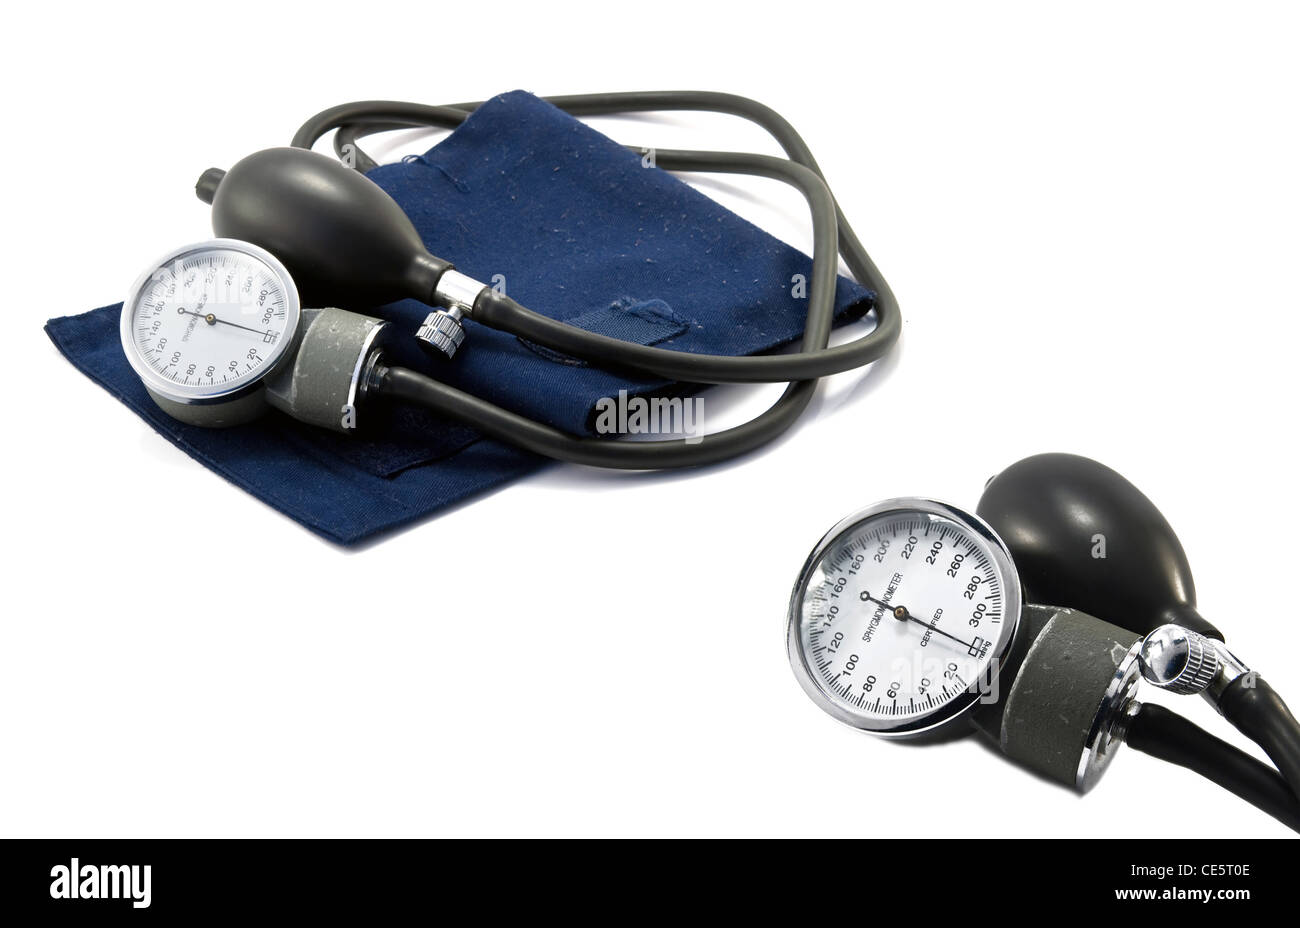 sphygmomanometer, the instrument used to measure blood pressure Stock Photo